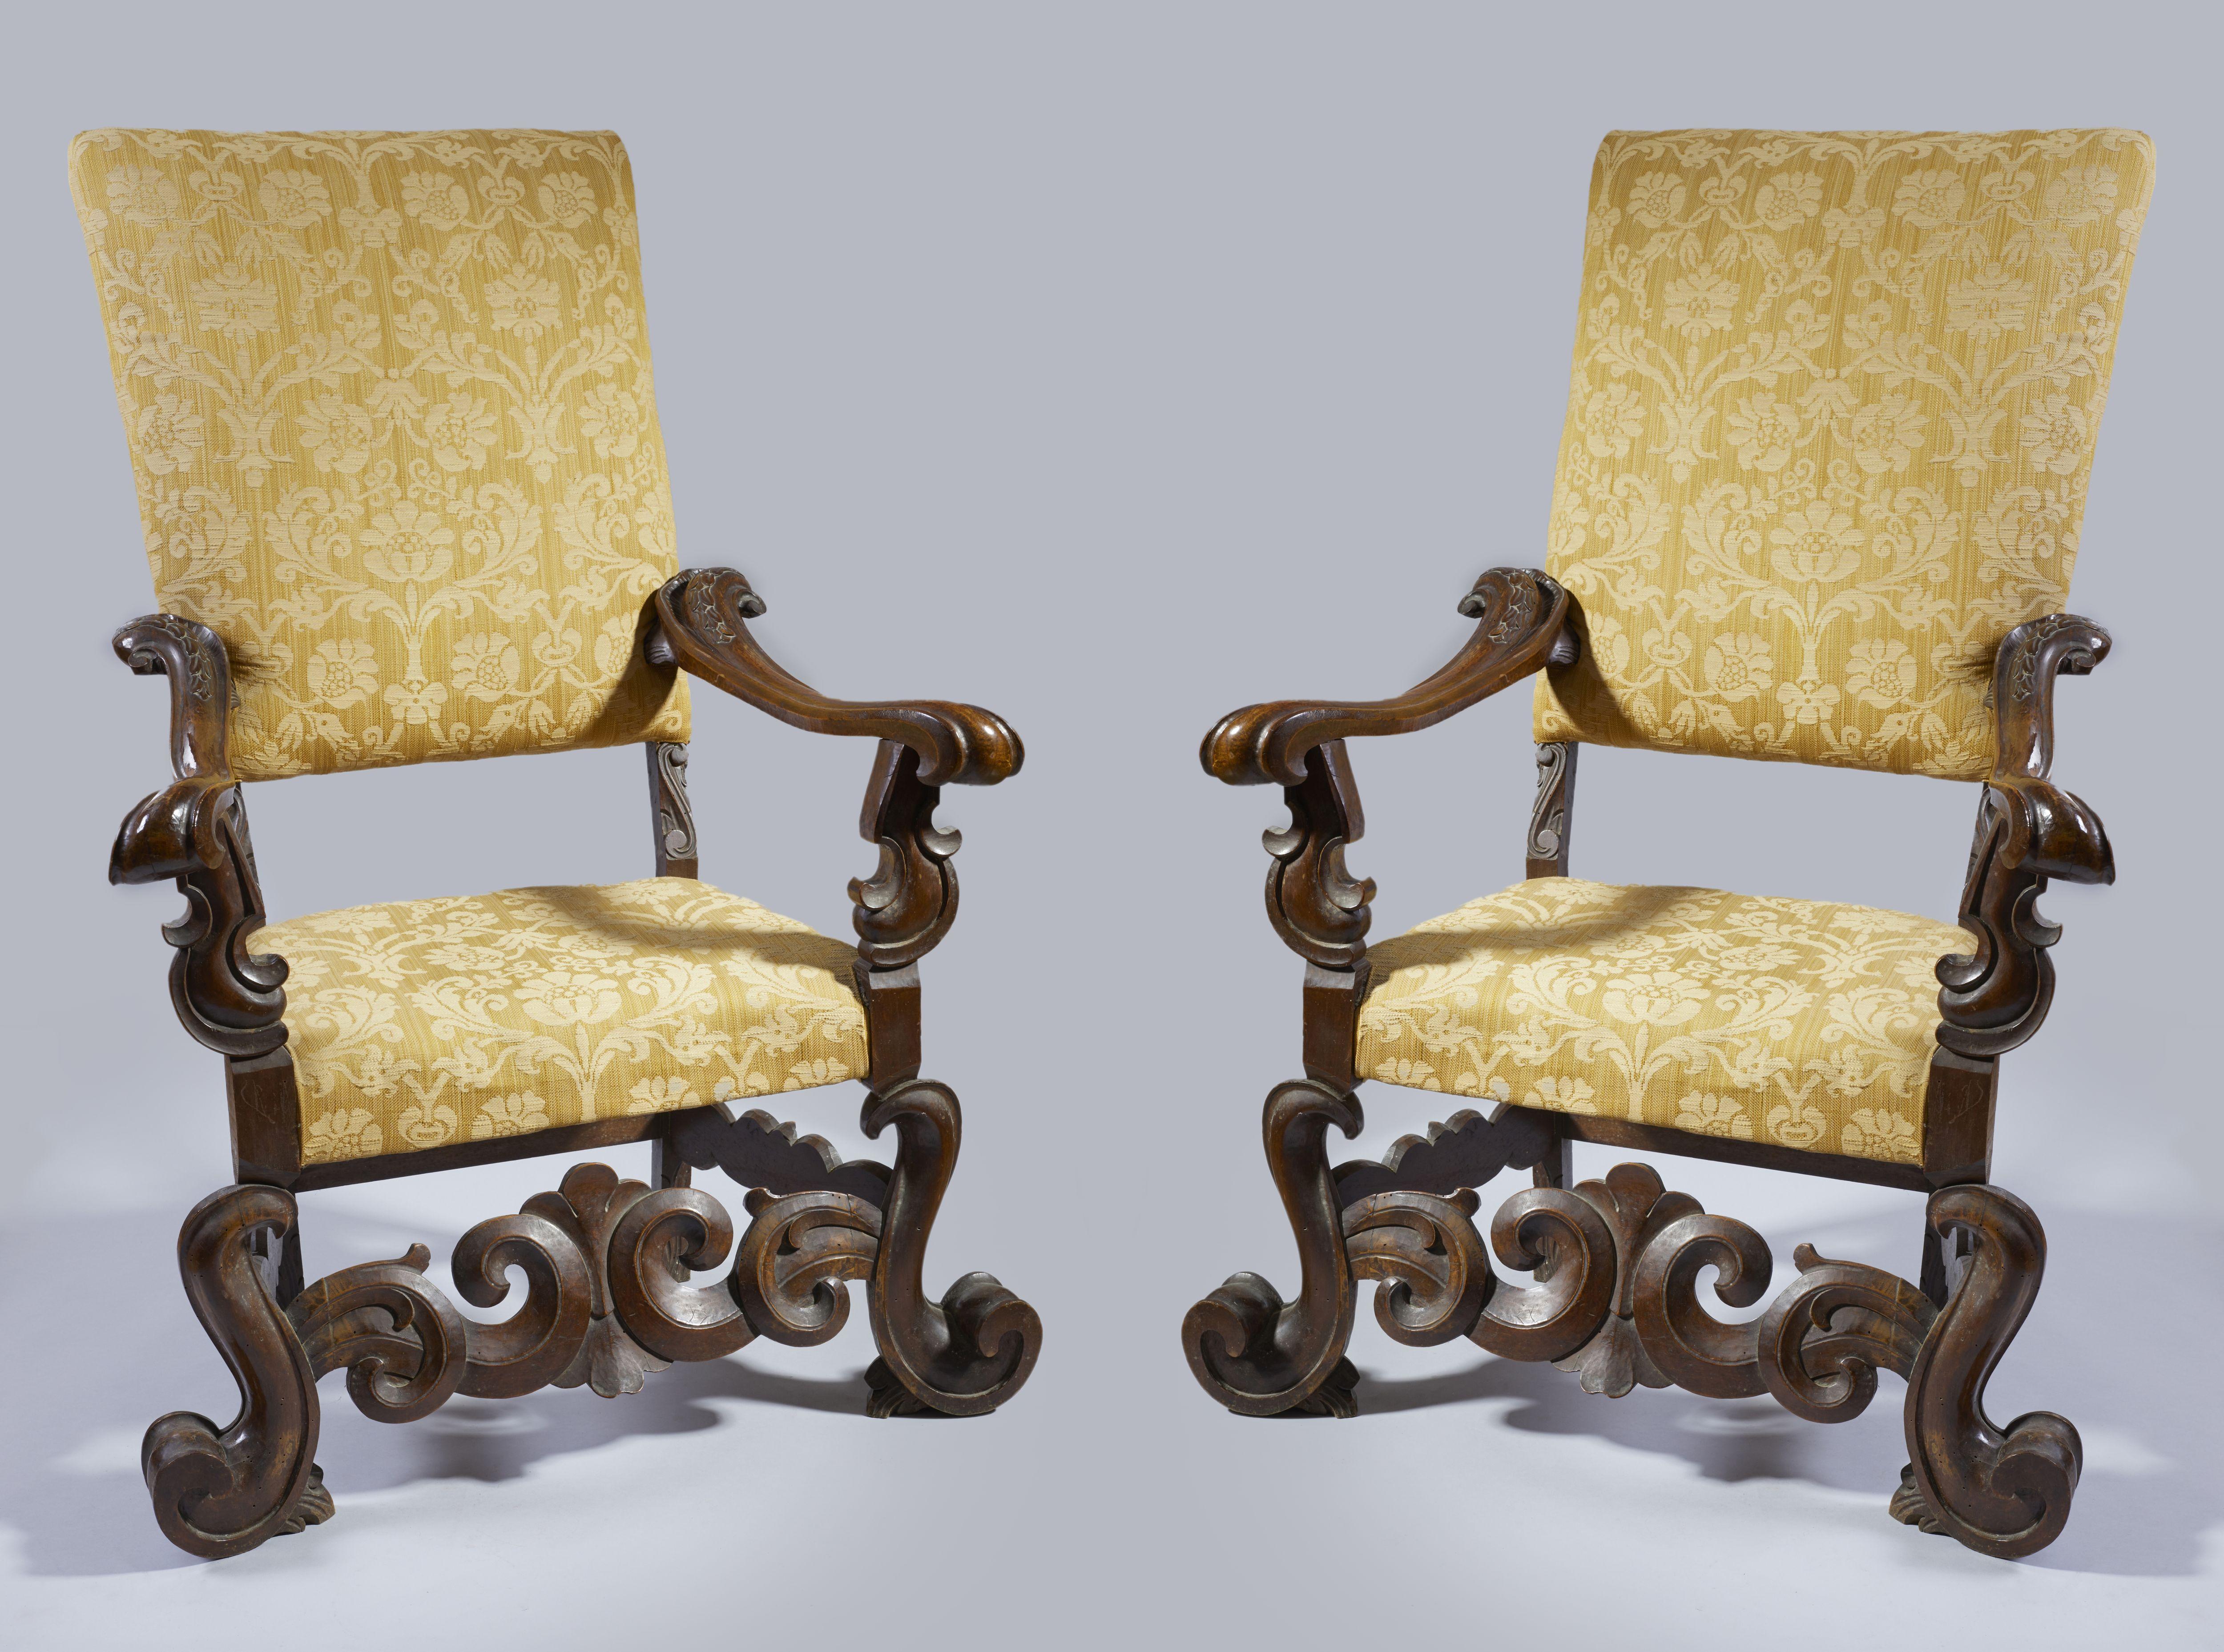 Pair of Louis XV Venetian armchairs in walnut, measuring 137 x 90 x 70 cm and with a seat of 48 x 70 cm, from the end of the 17th century with a pronounced carving, not in common use, of great importance.

In the seventeenth century chairs and